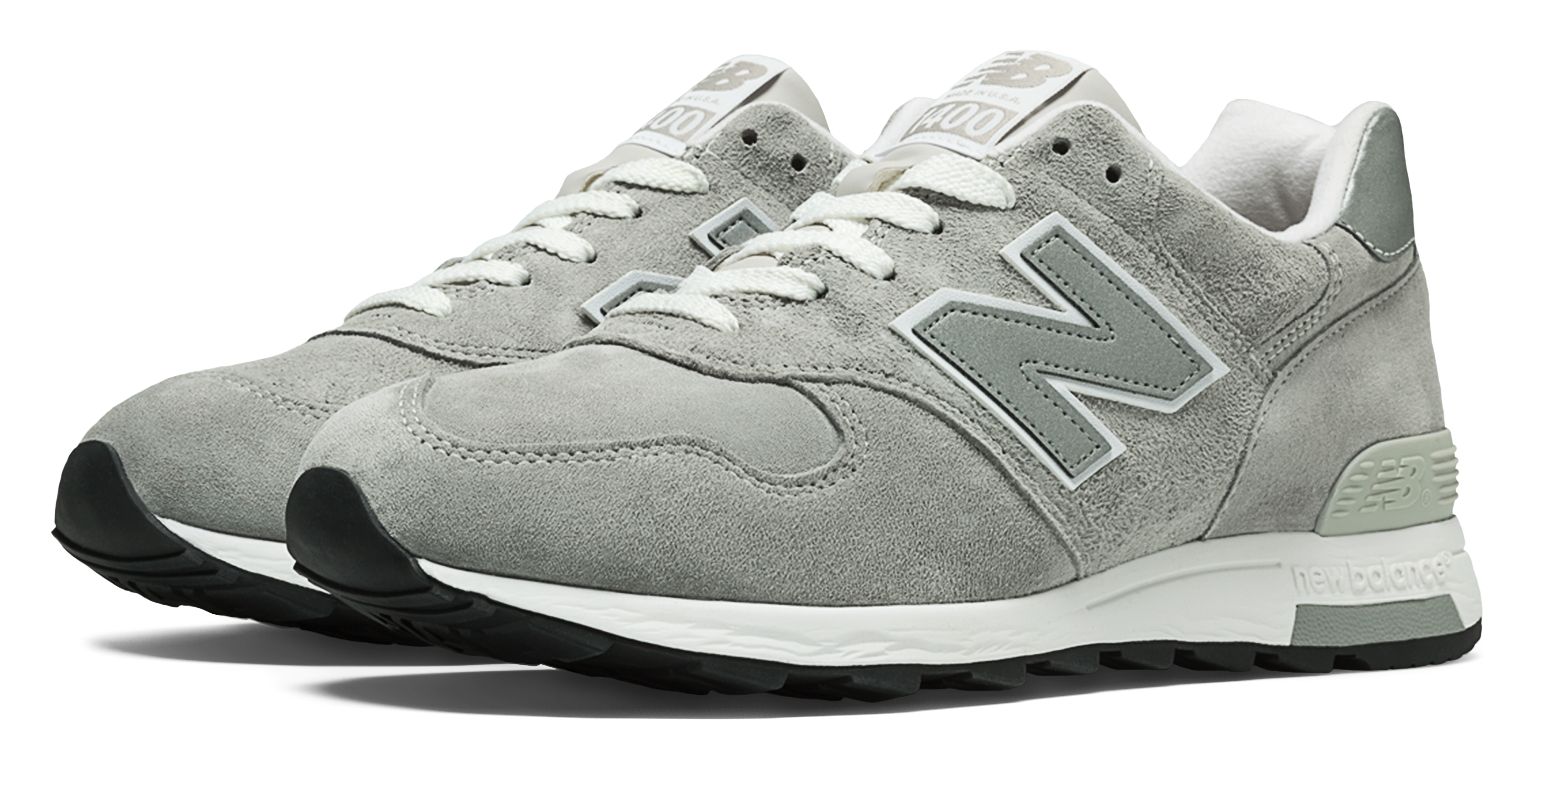 New Balance 1400 Connoisseur, Grey with White